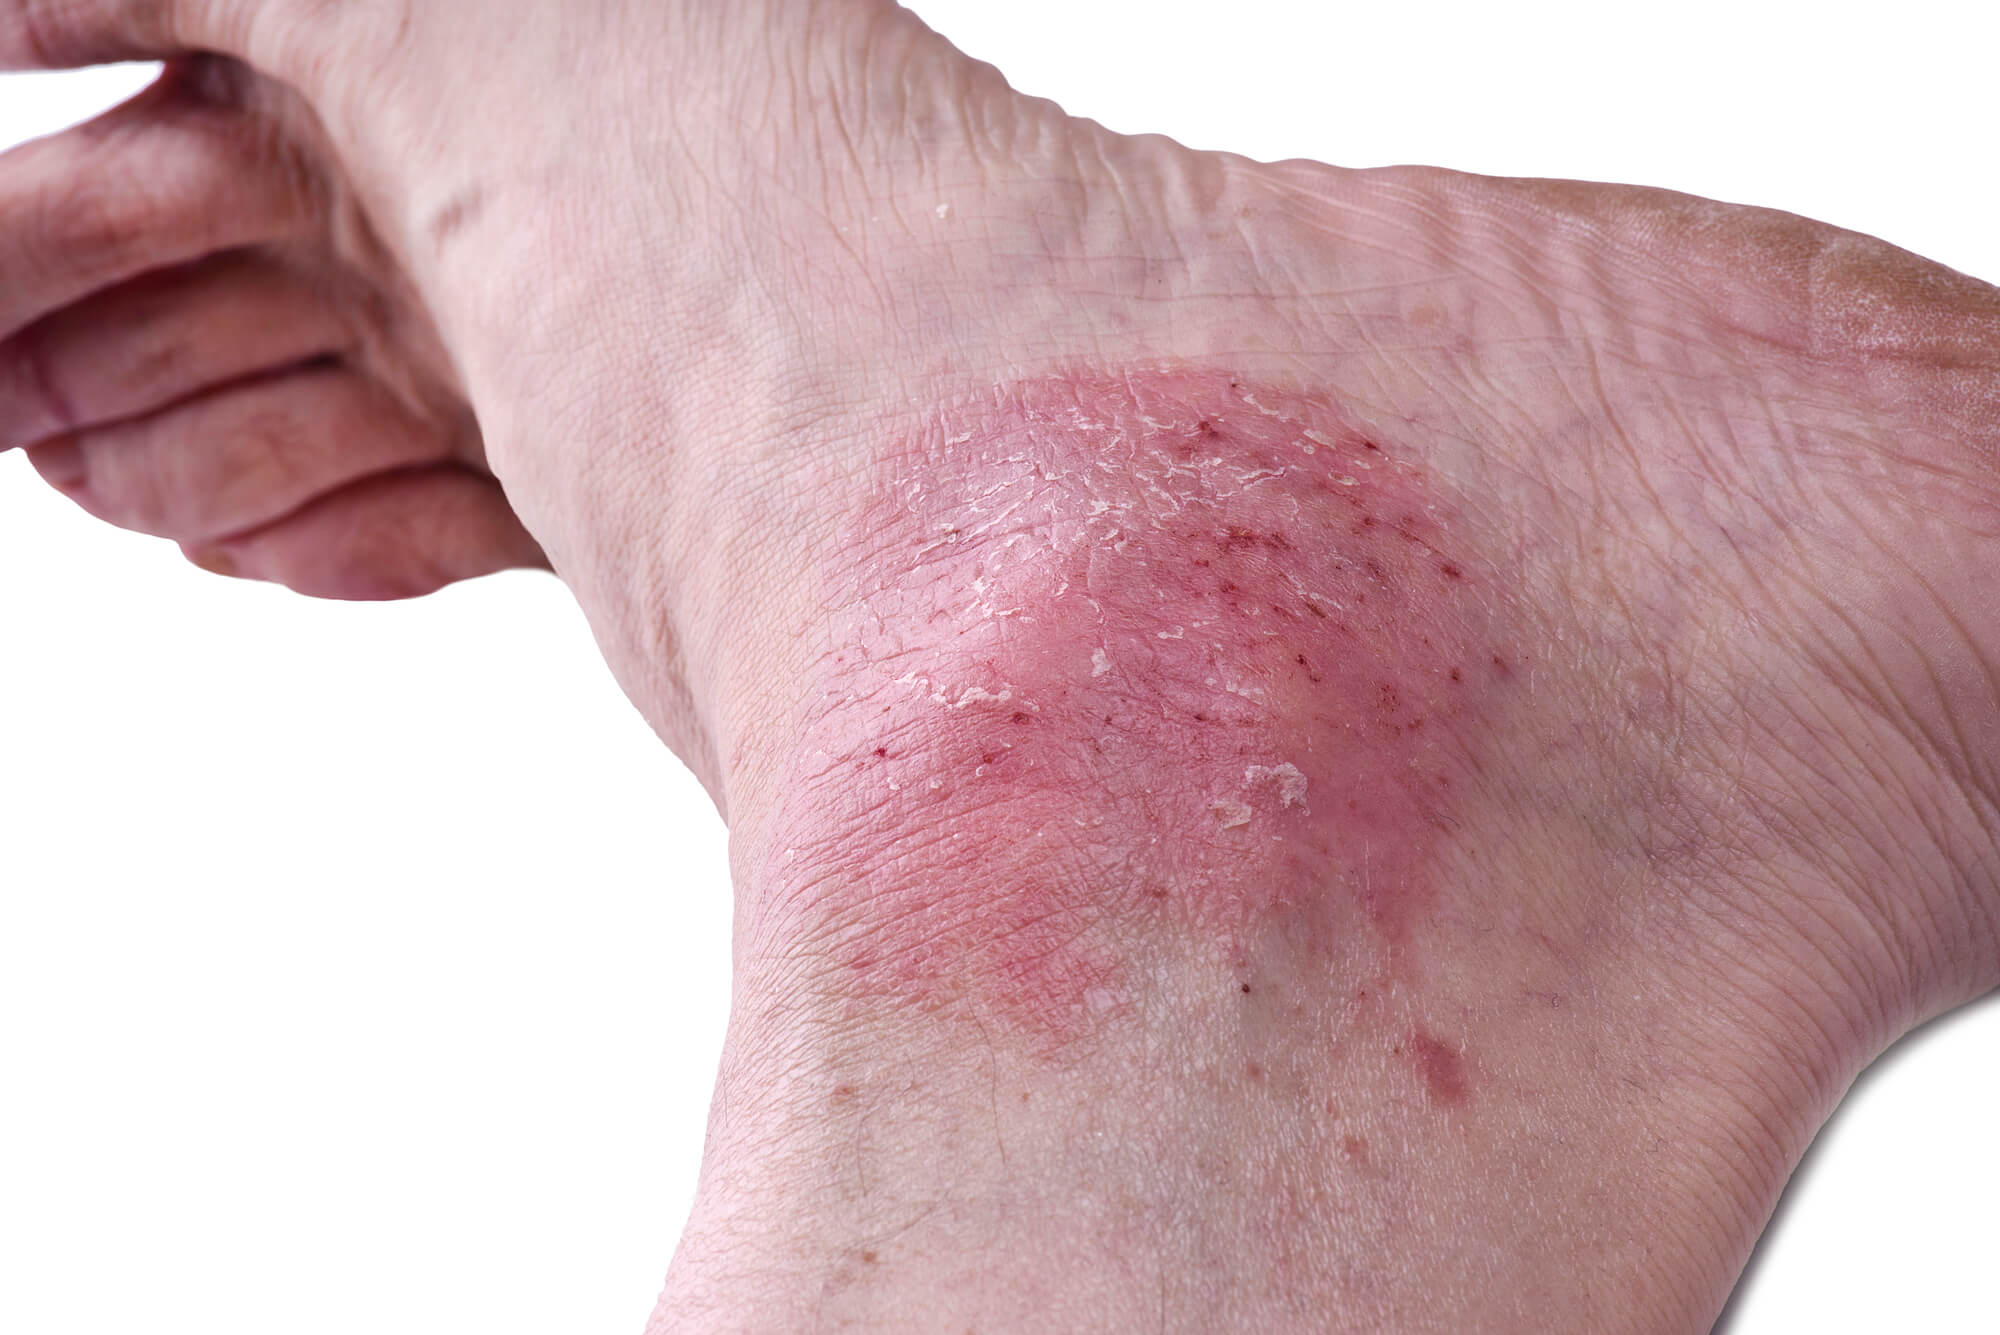 Psoriasis on foot